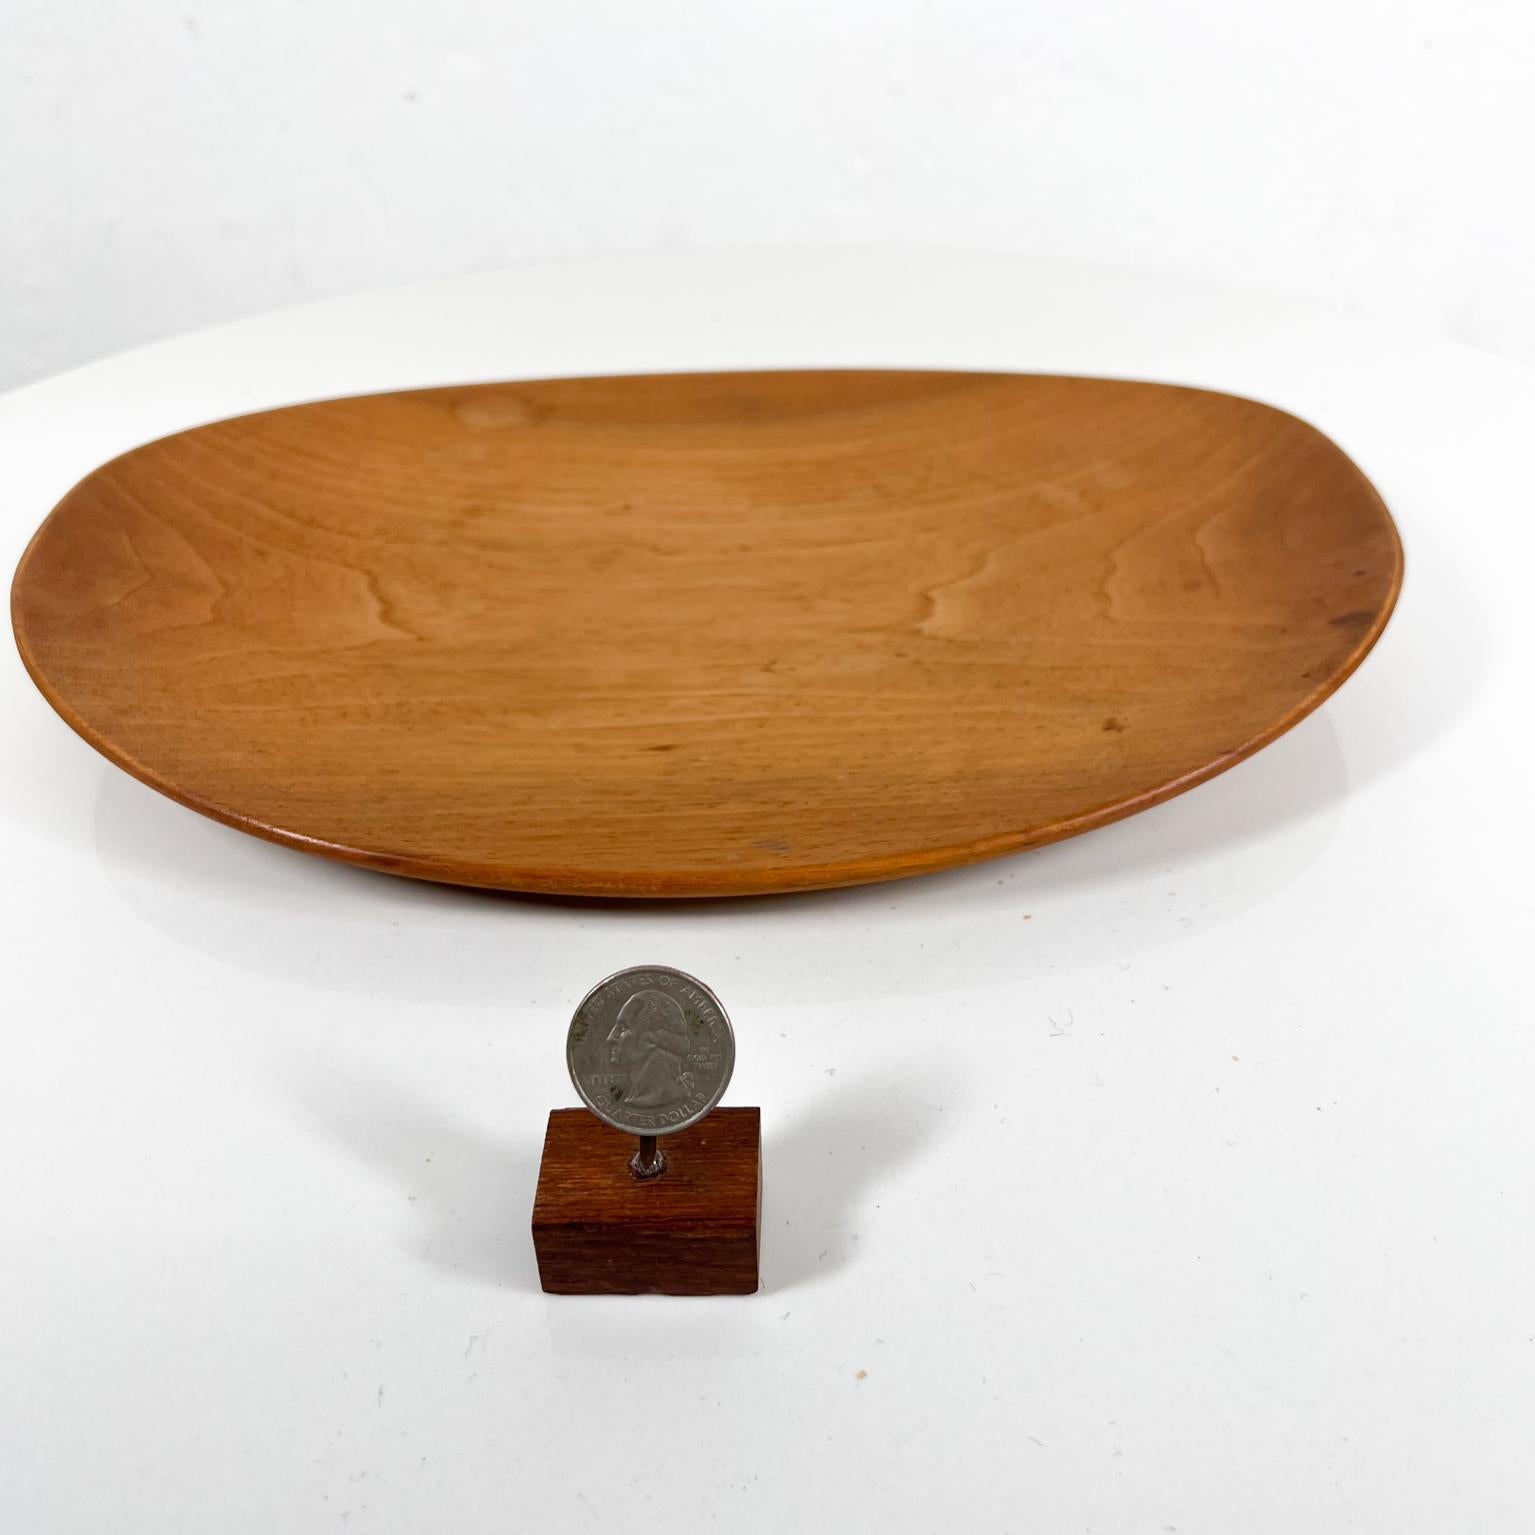 1960s Sculptural Oval Platter Cherry Wood Plate Serving Tray 
11.63 w x 8.38 d x 1.38 h
Preowned vintage condition unrestored.
See images please.


